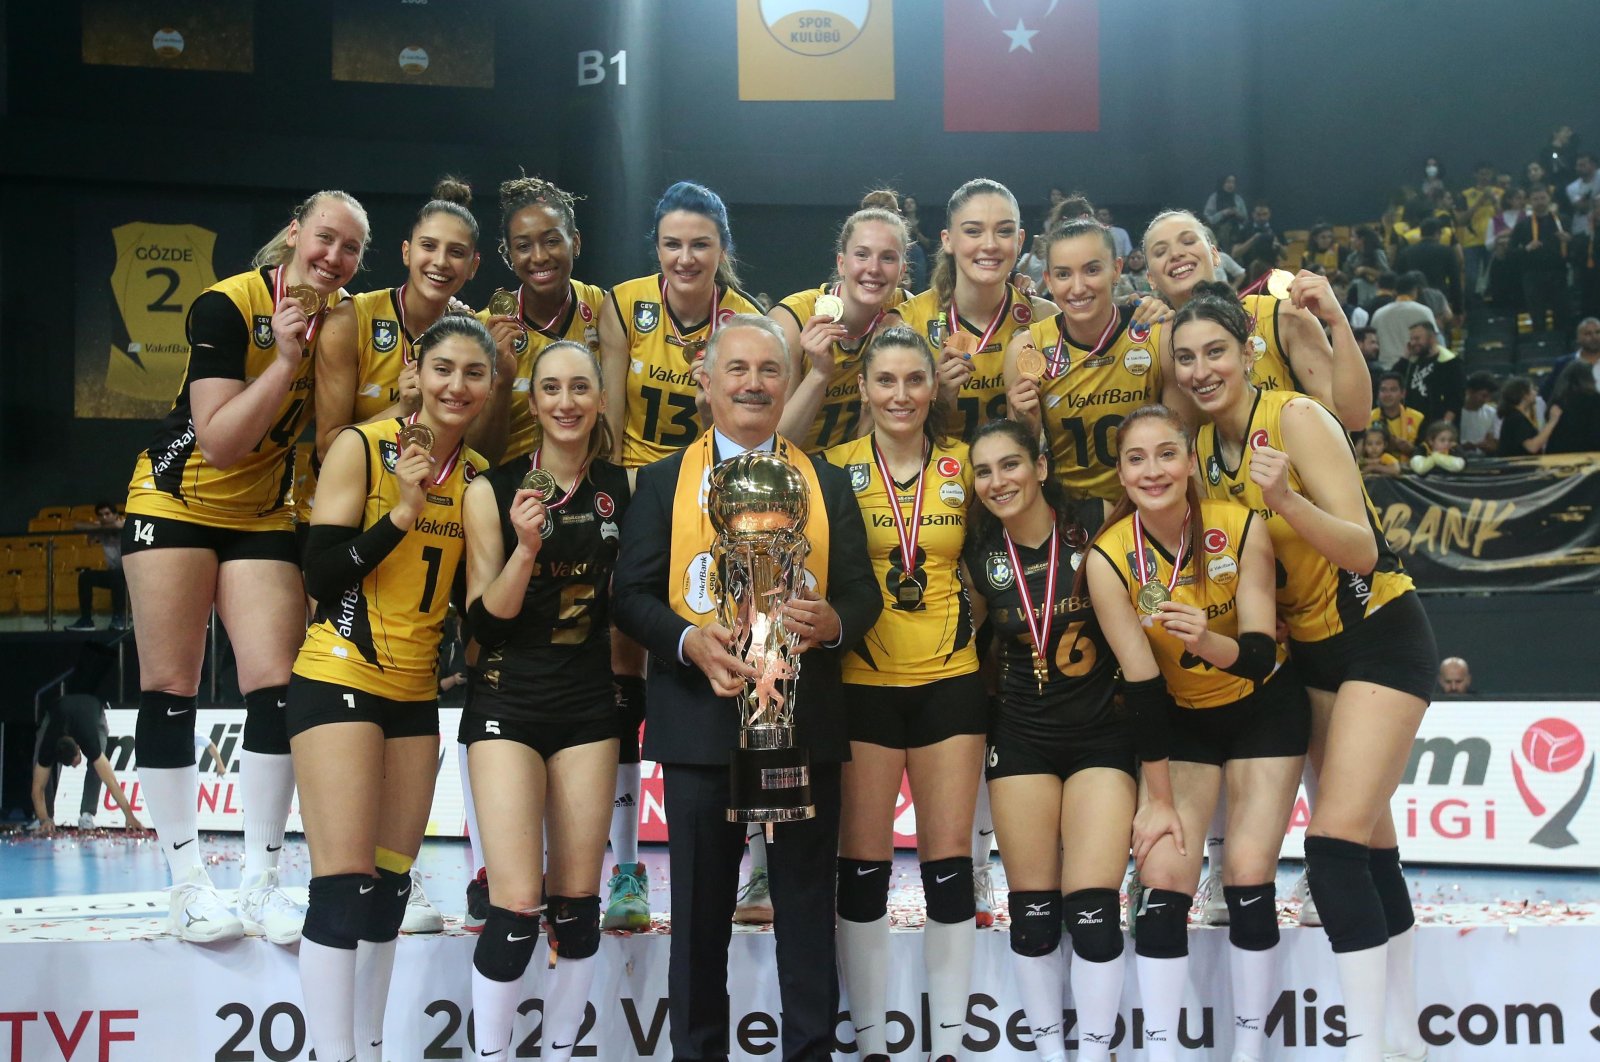 Vakıfbank Istanbul celebrate after victory, May 22, 2022. (DHA Photo)